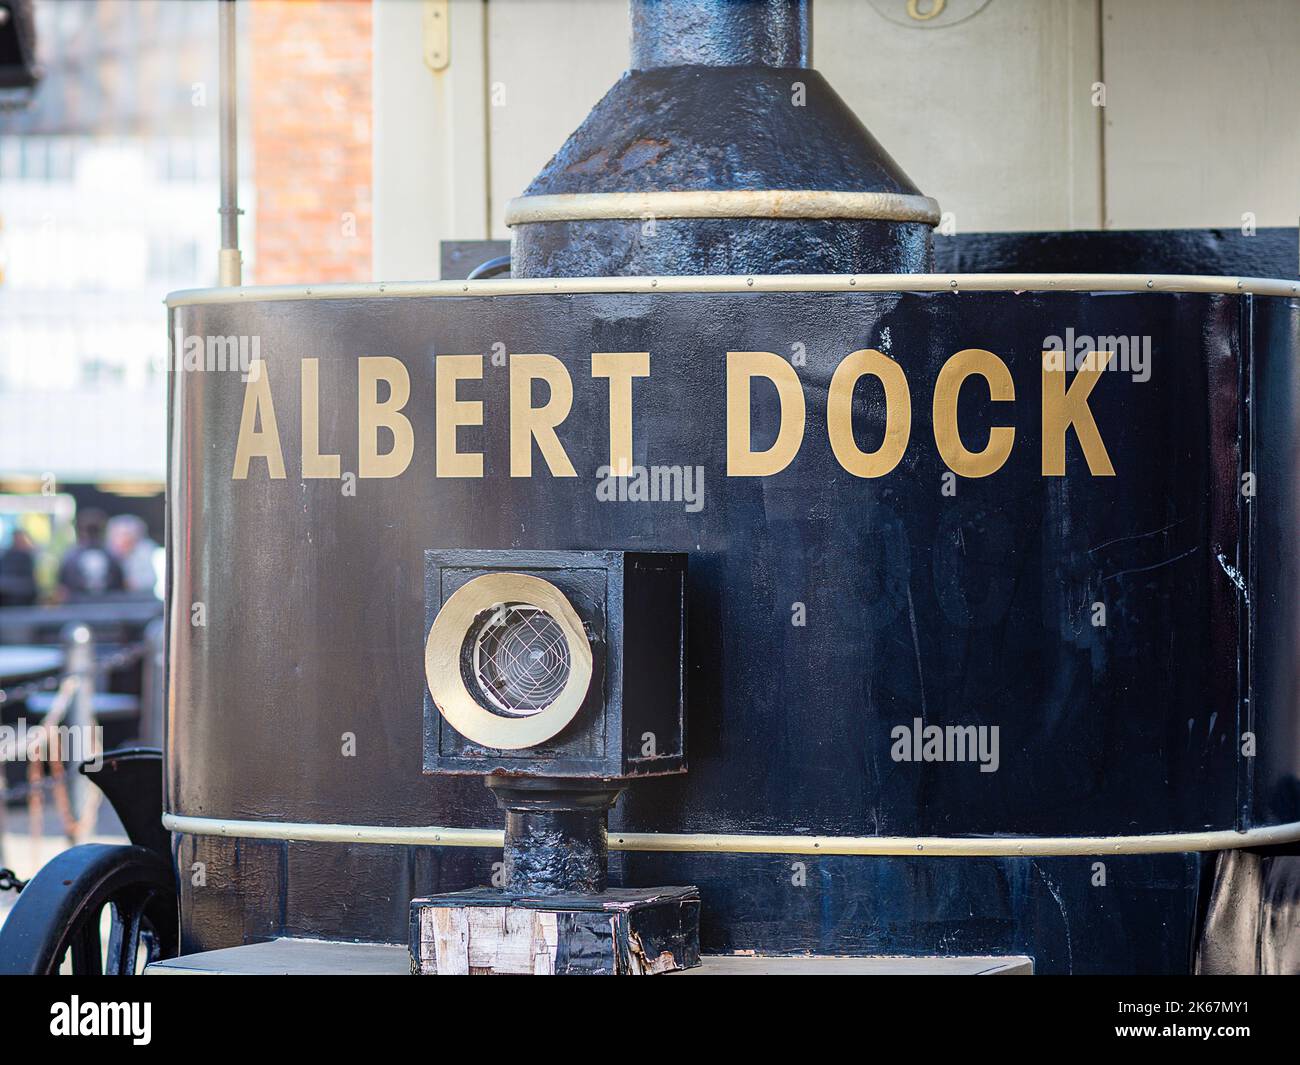 Albert dock Liverpool name painted in gold on the back of traction engine steam powered vehicle Stock Photo